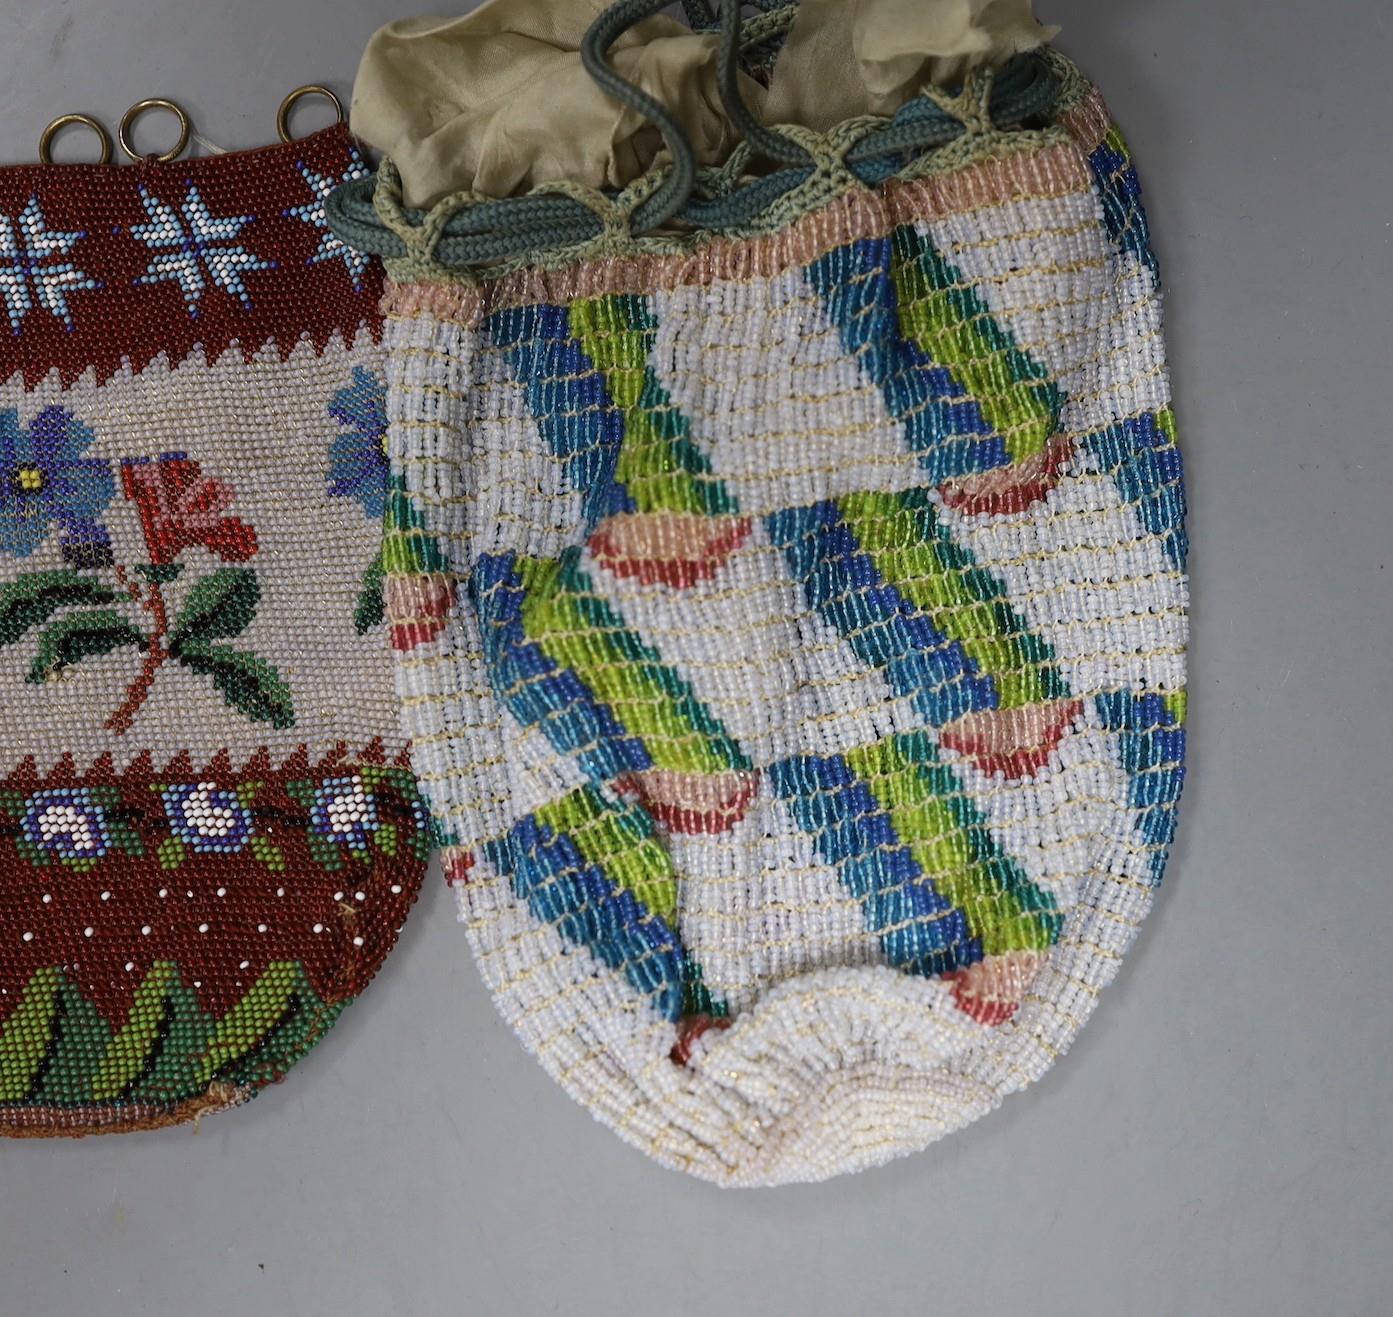 A 19th century bead worked bag with sailing ship design, a similar floral bead worked bag and a - Image 4 of 4